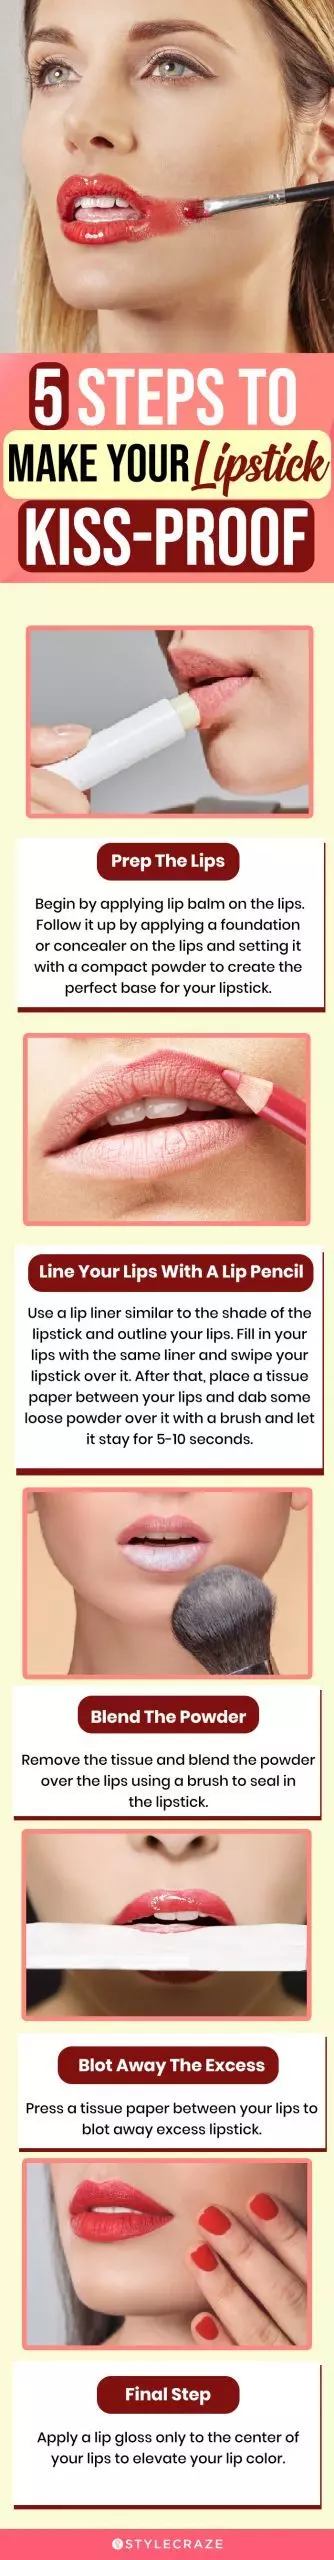 5 steps to lipstick kiss proof (infographic)